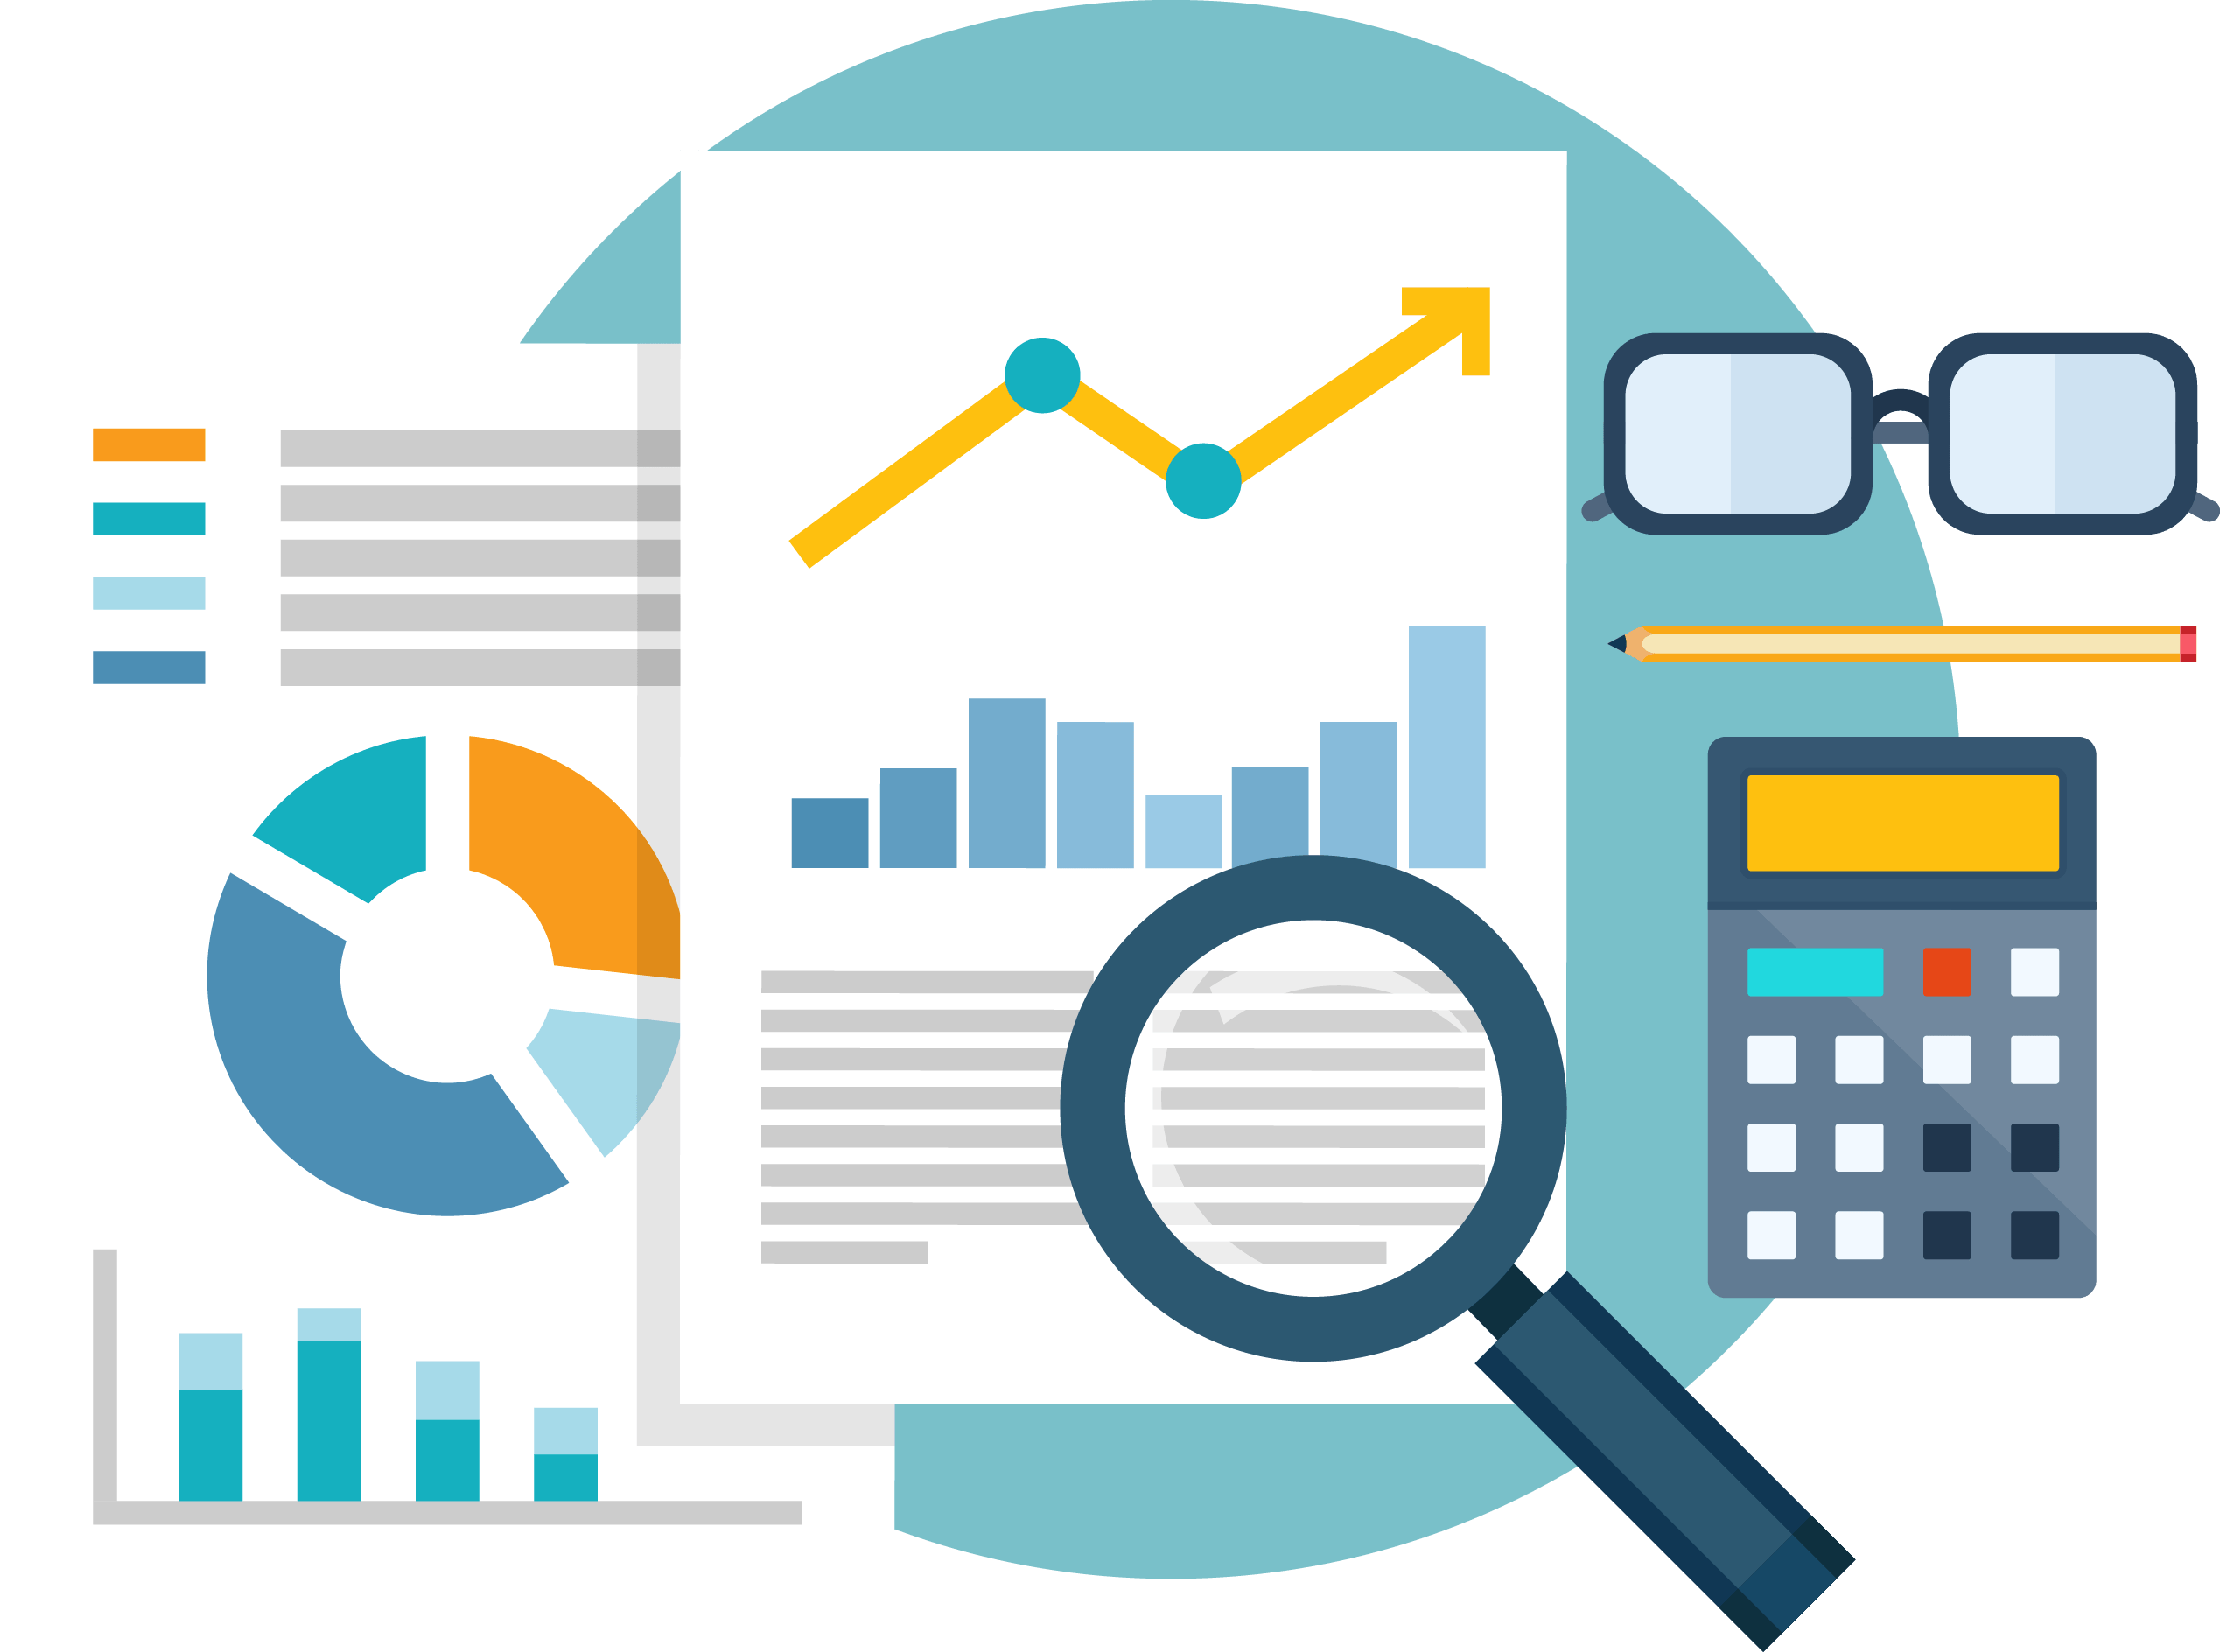 Business Intelligence & Reporting